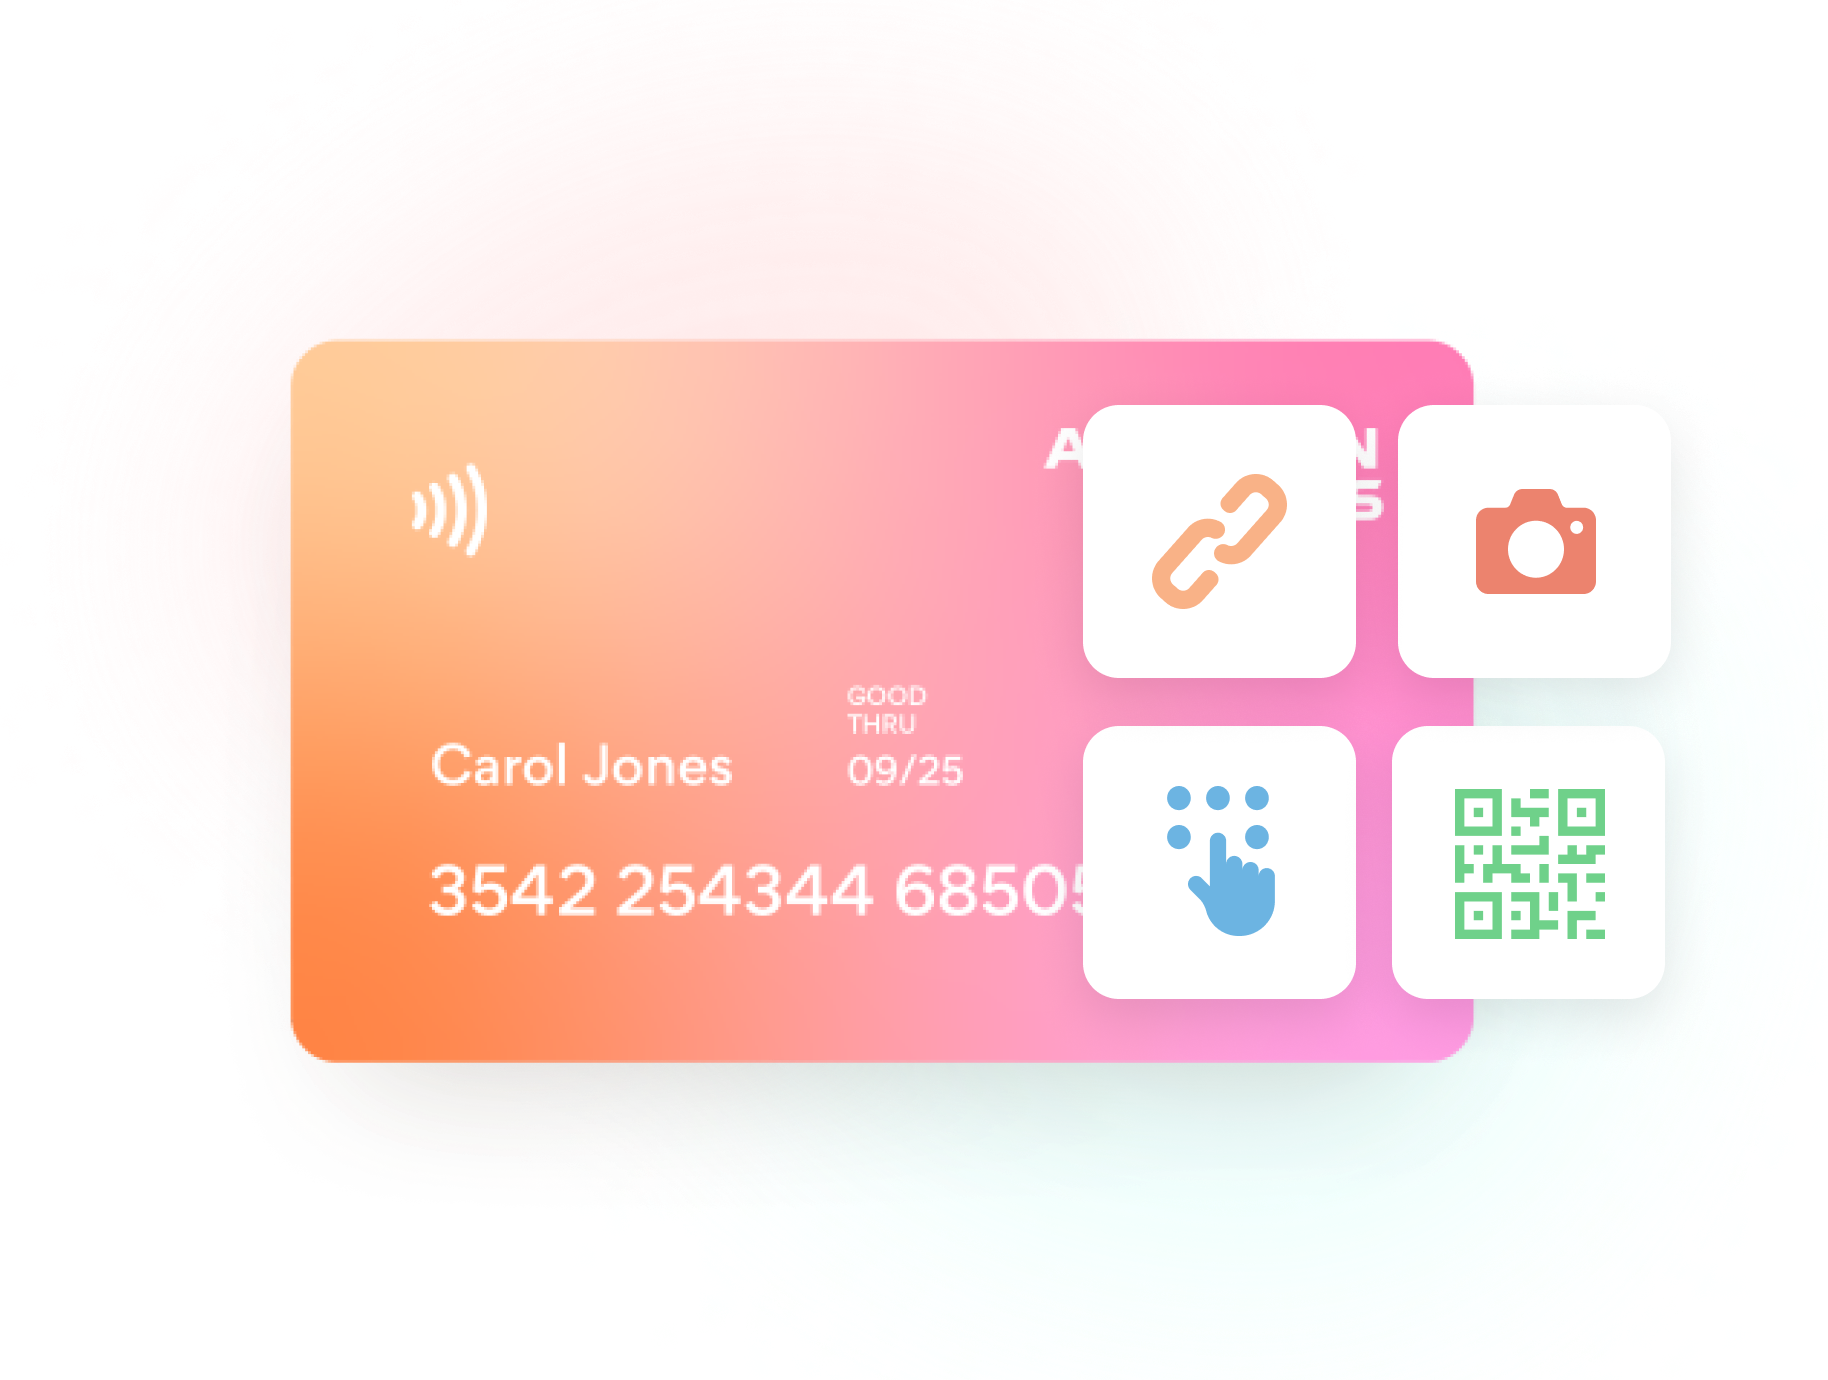 Accept in-person card payments on your phone with Nomod